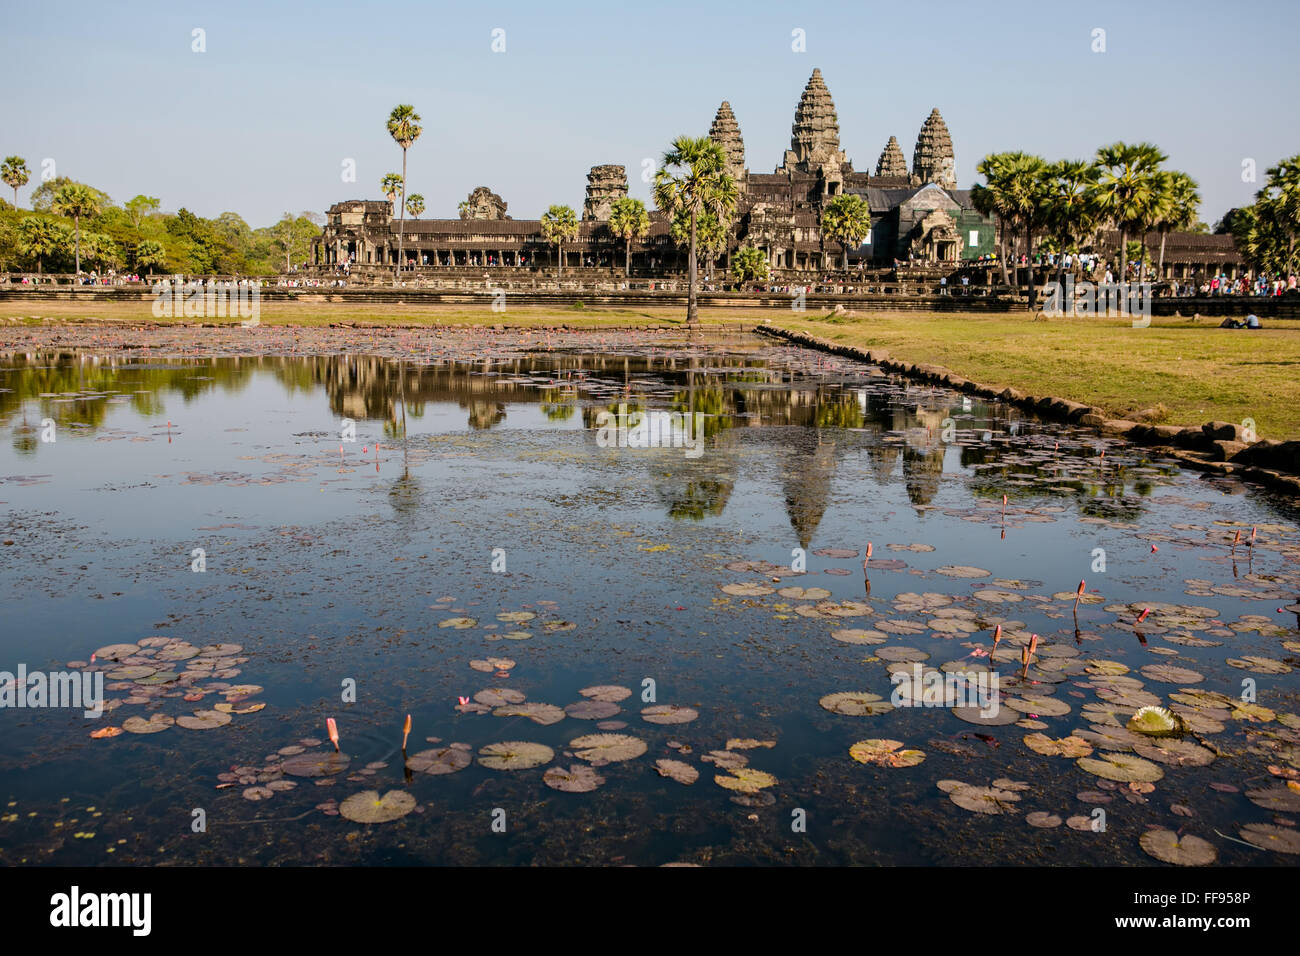 Angkor Wat exterior overlooking lily pond Stock Photo